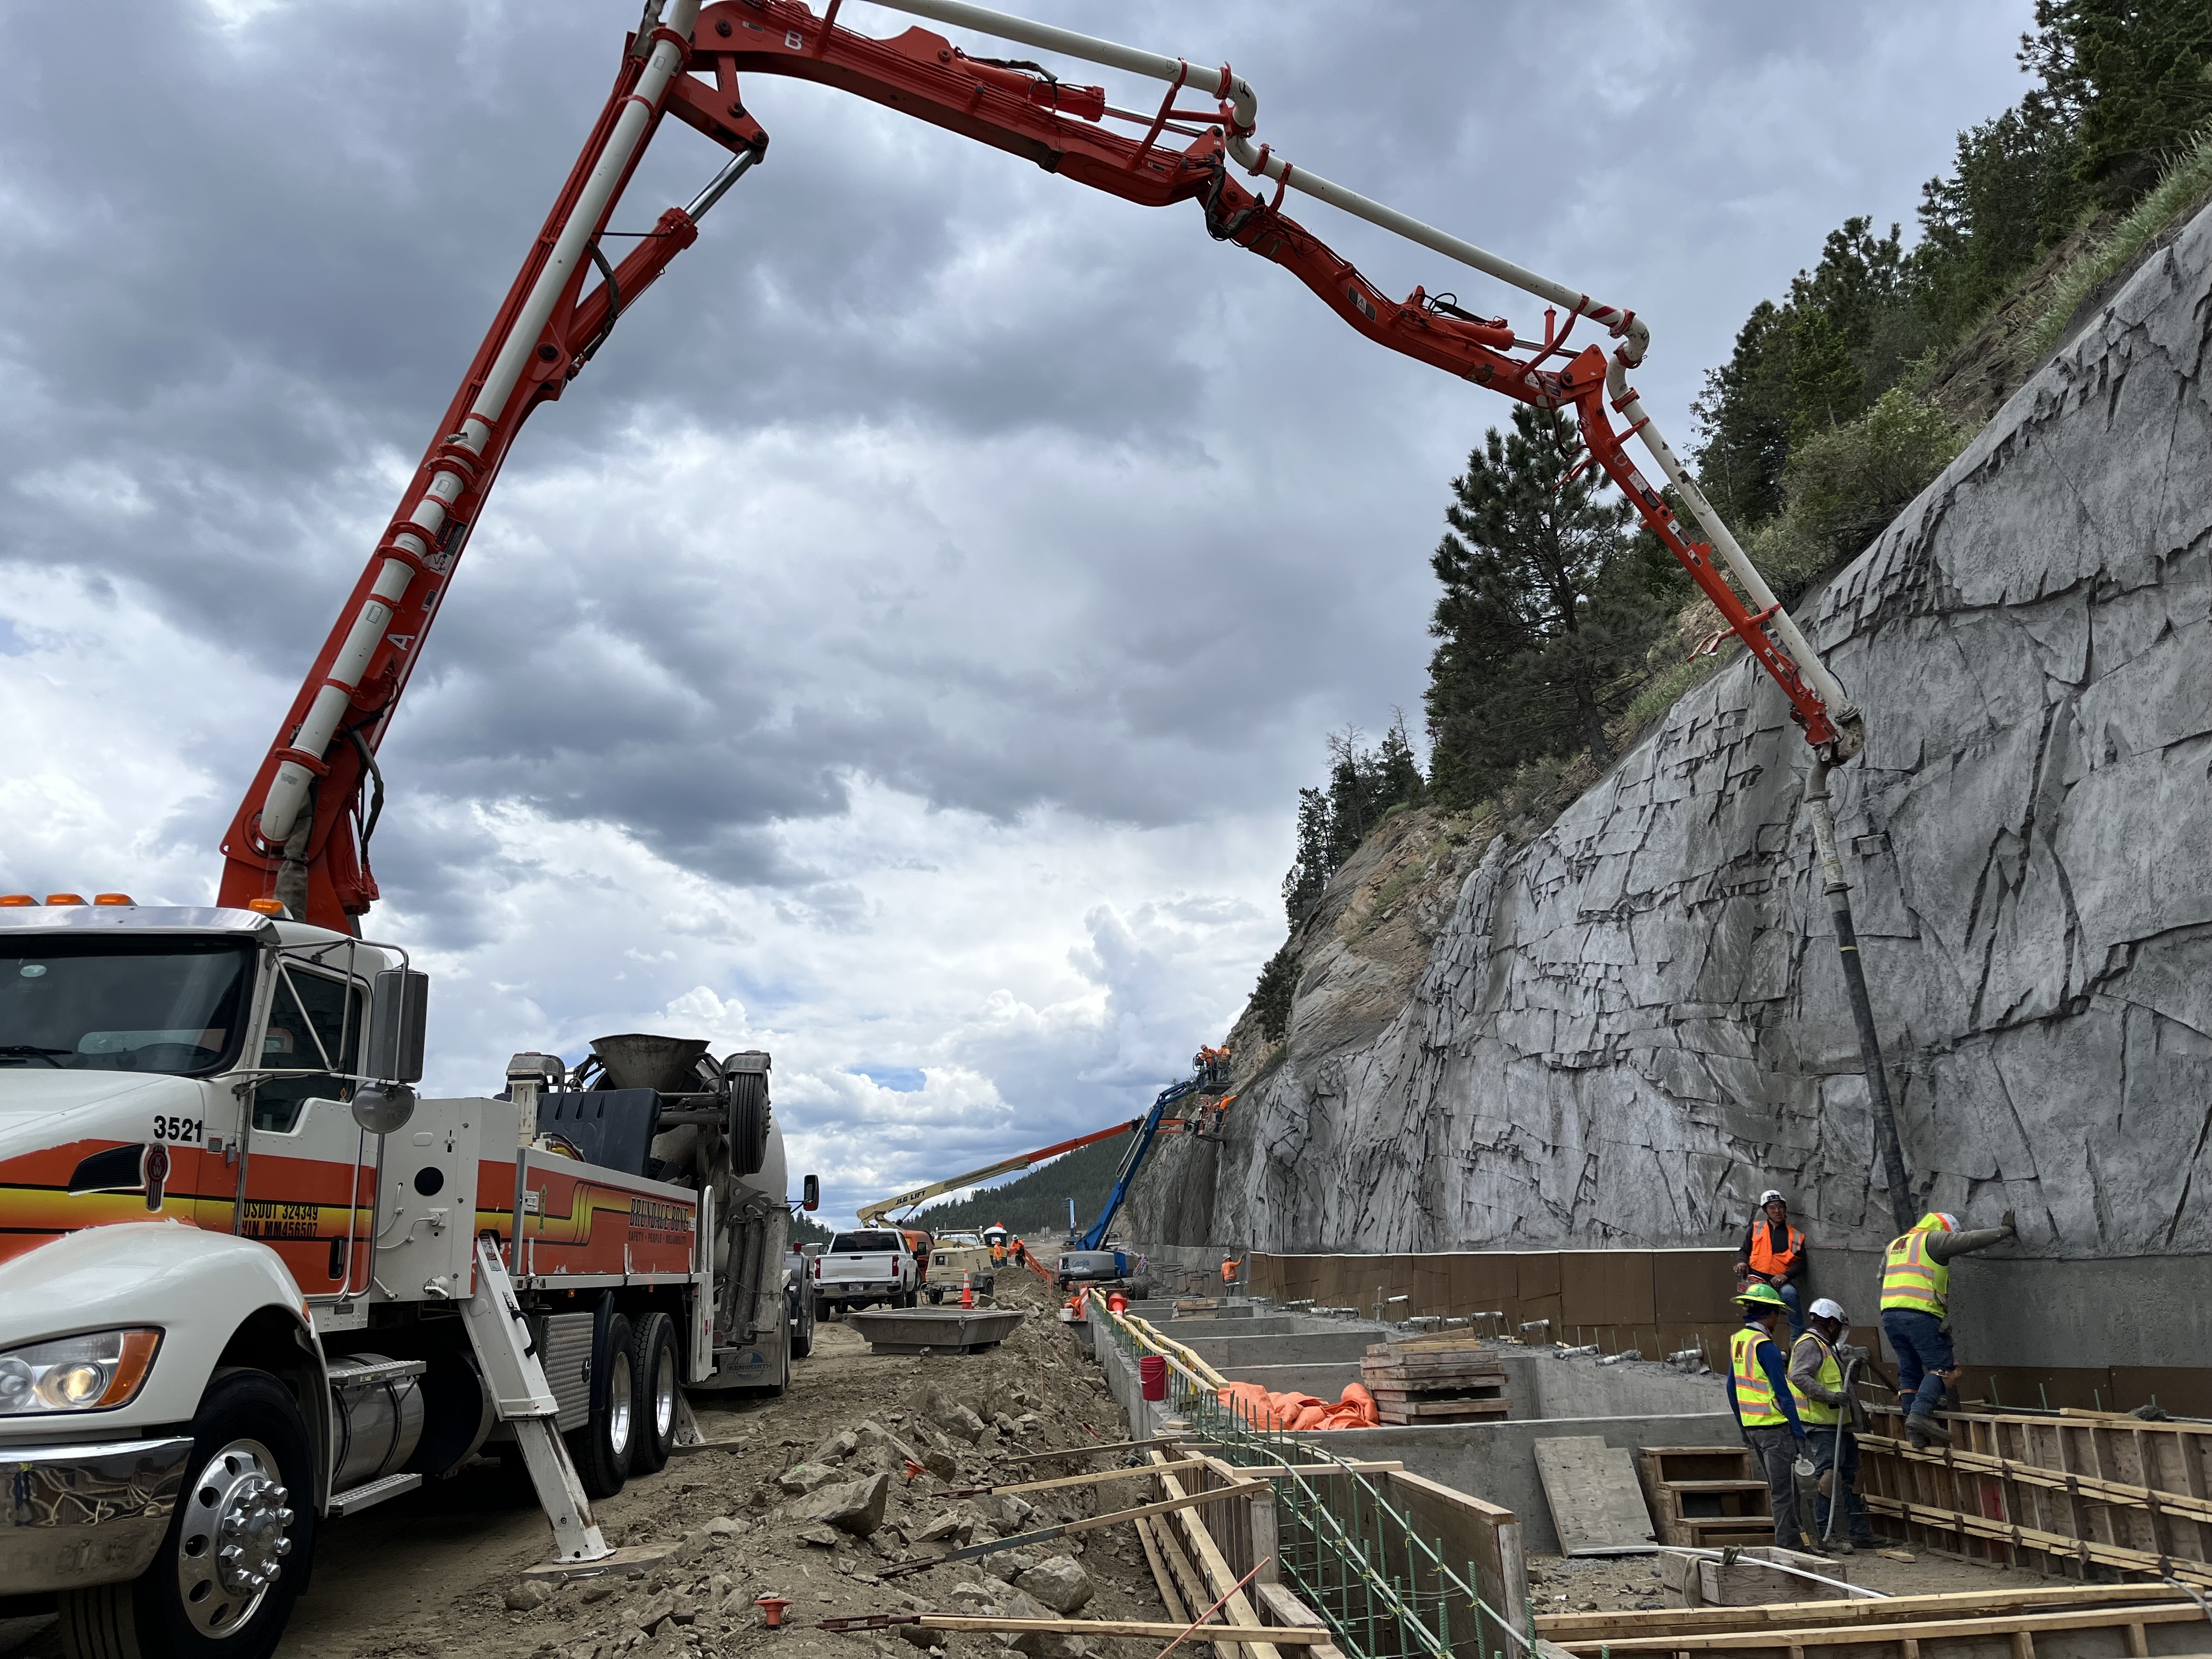 I-70 Floyd Hill Truck Pumping Concrete for Super Ditch and Shotcrete Spraying and Sculpting in Background.jpg detail image